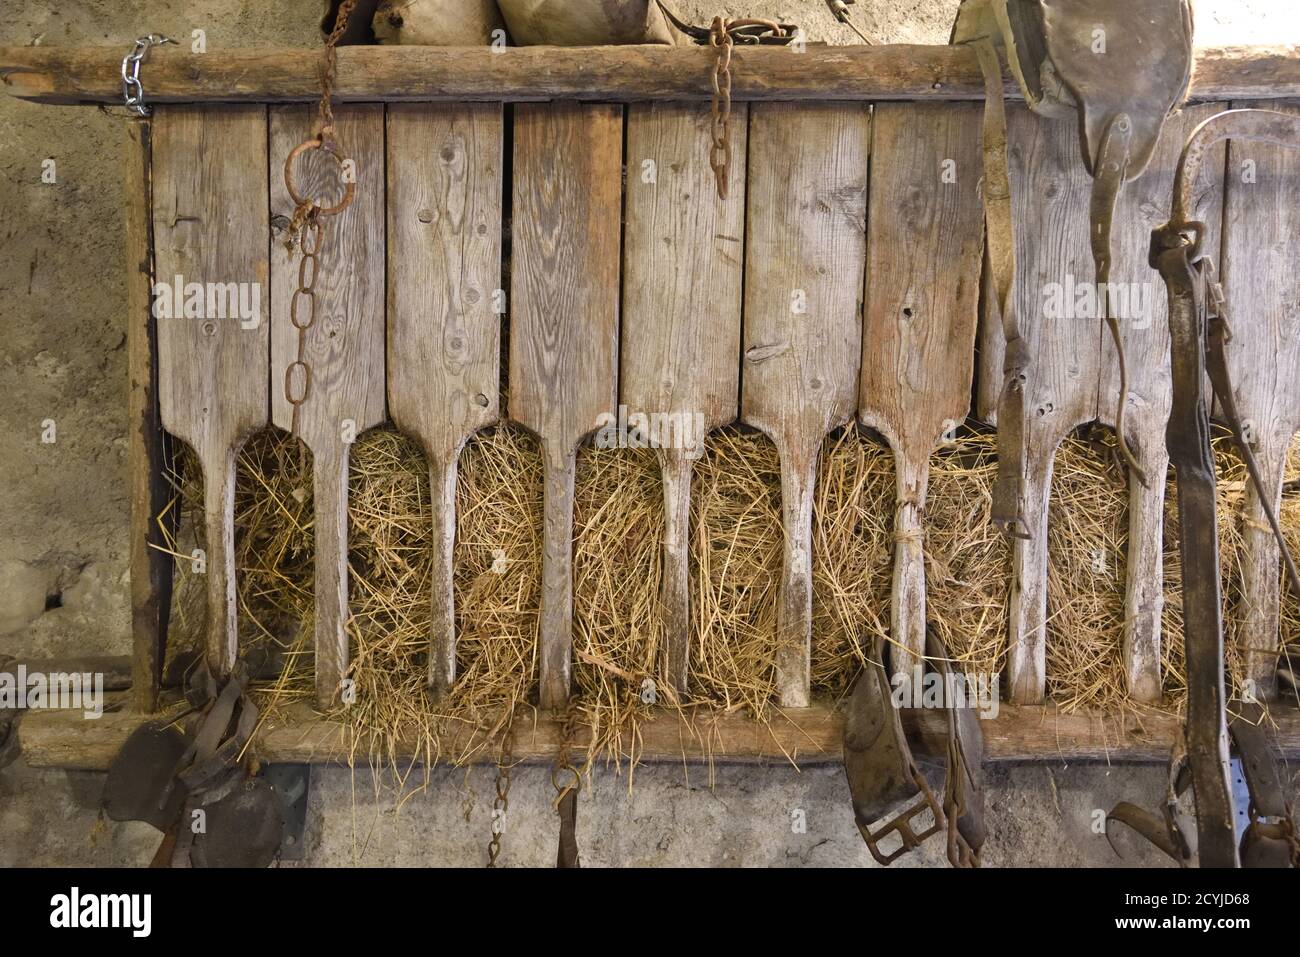 Old Wooden Hay Feeder or Trough in Old Farmhouse, Stables, Barn or Farm Building Provence France Stock Photo